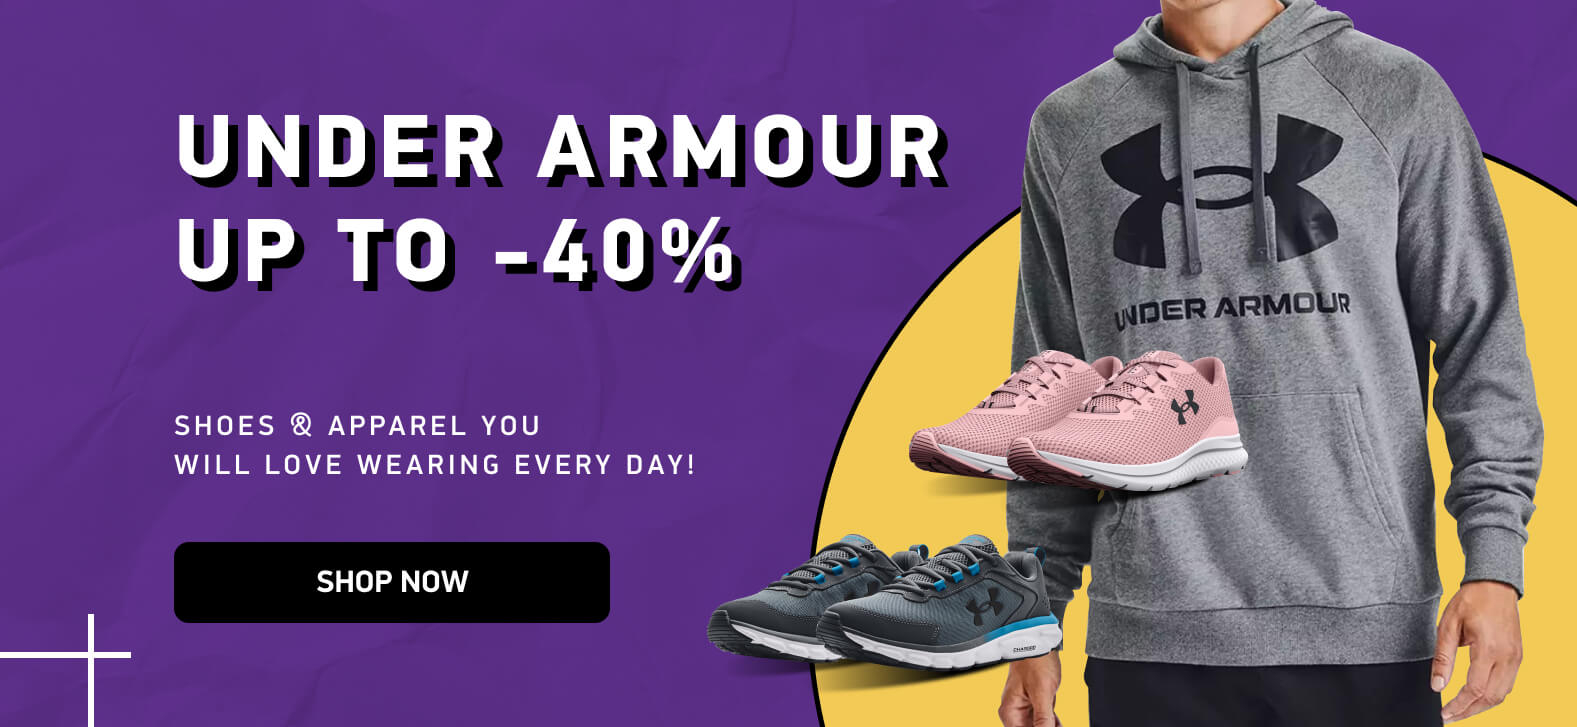 Under Armour up to -40%